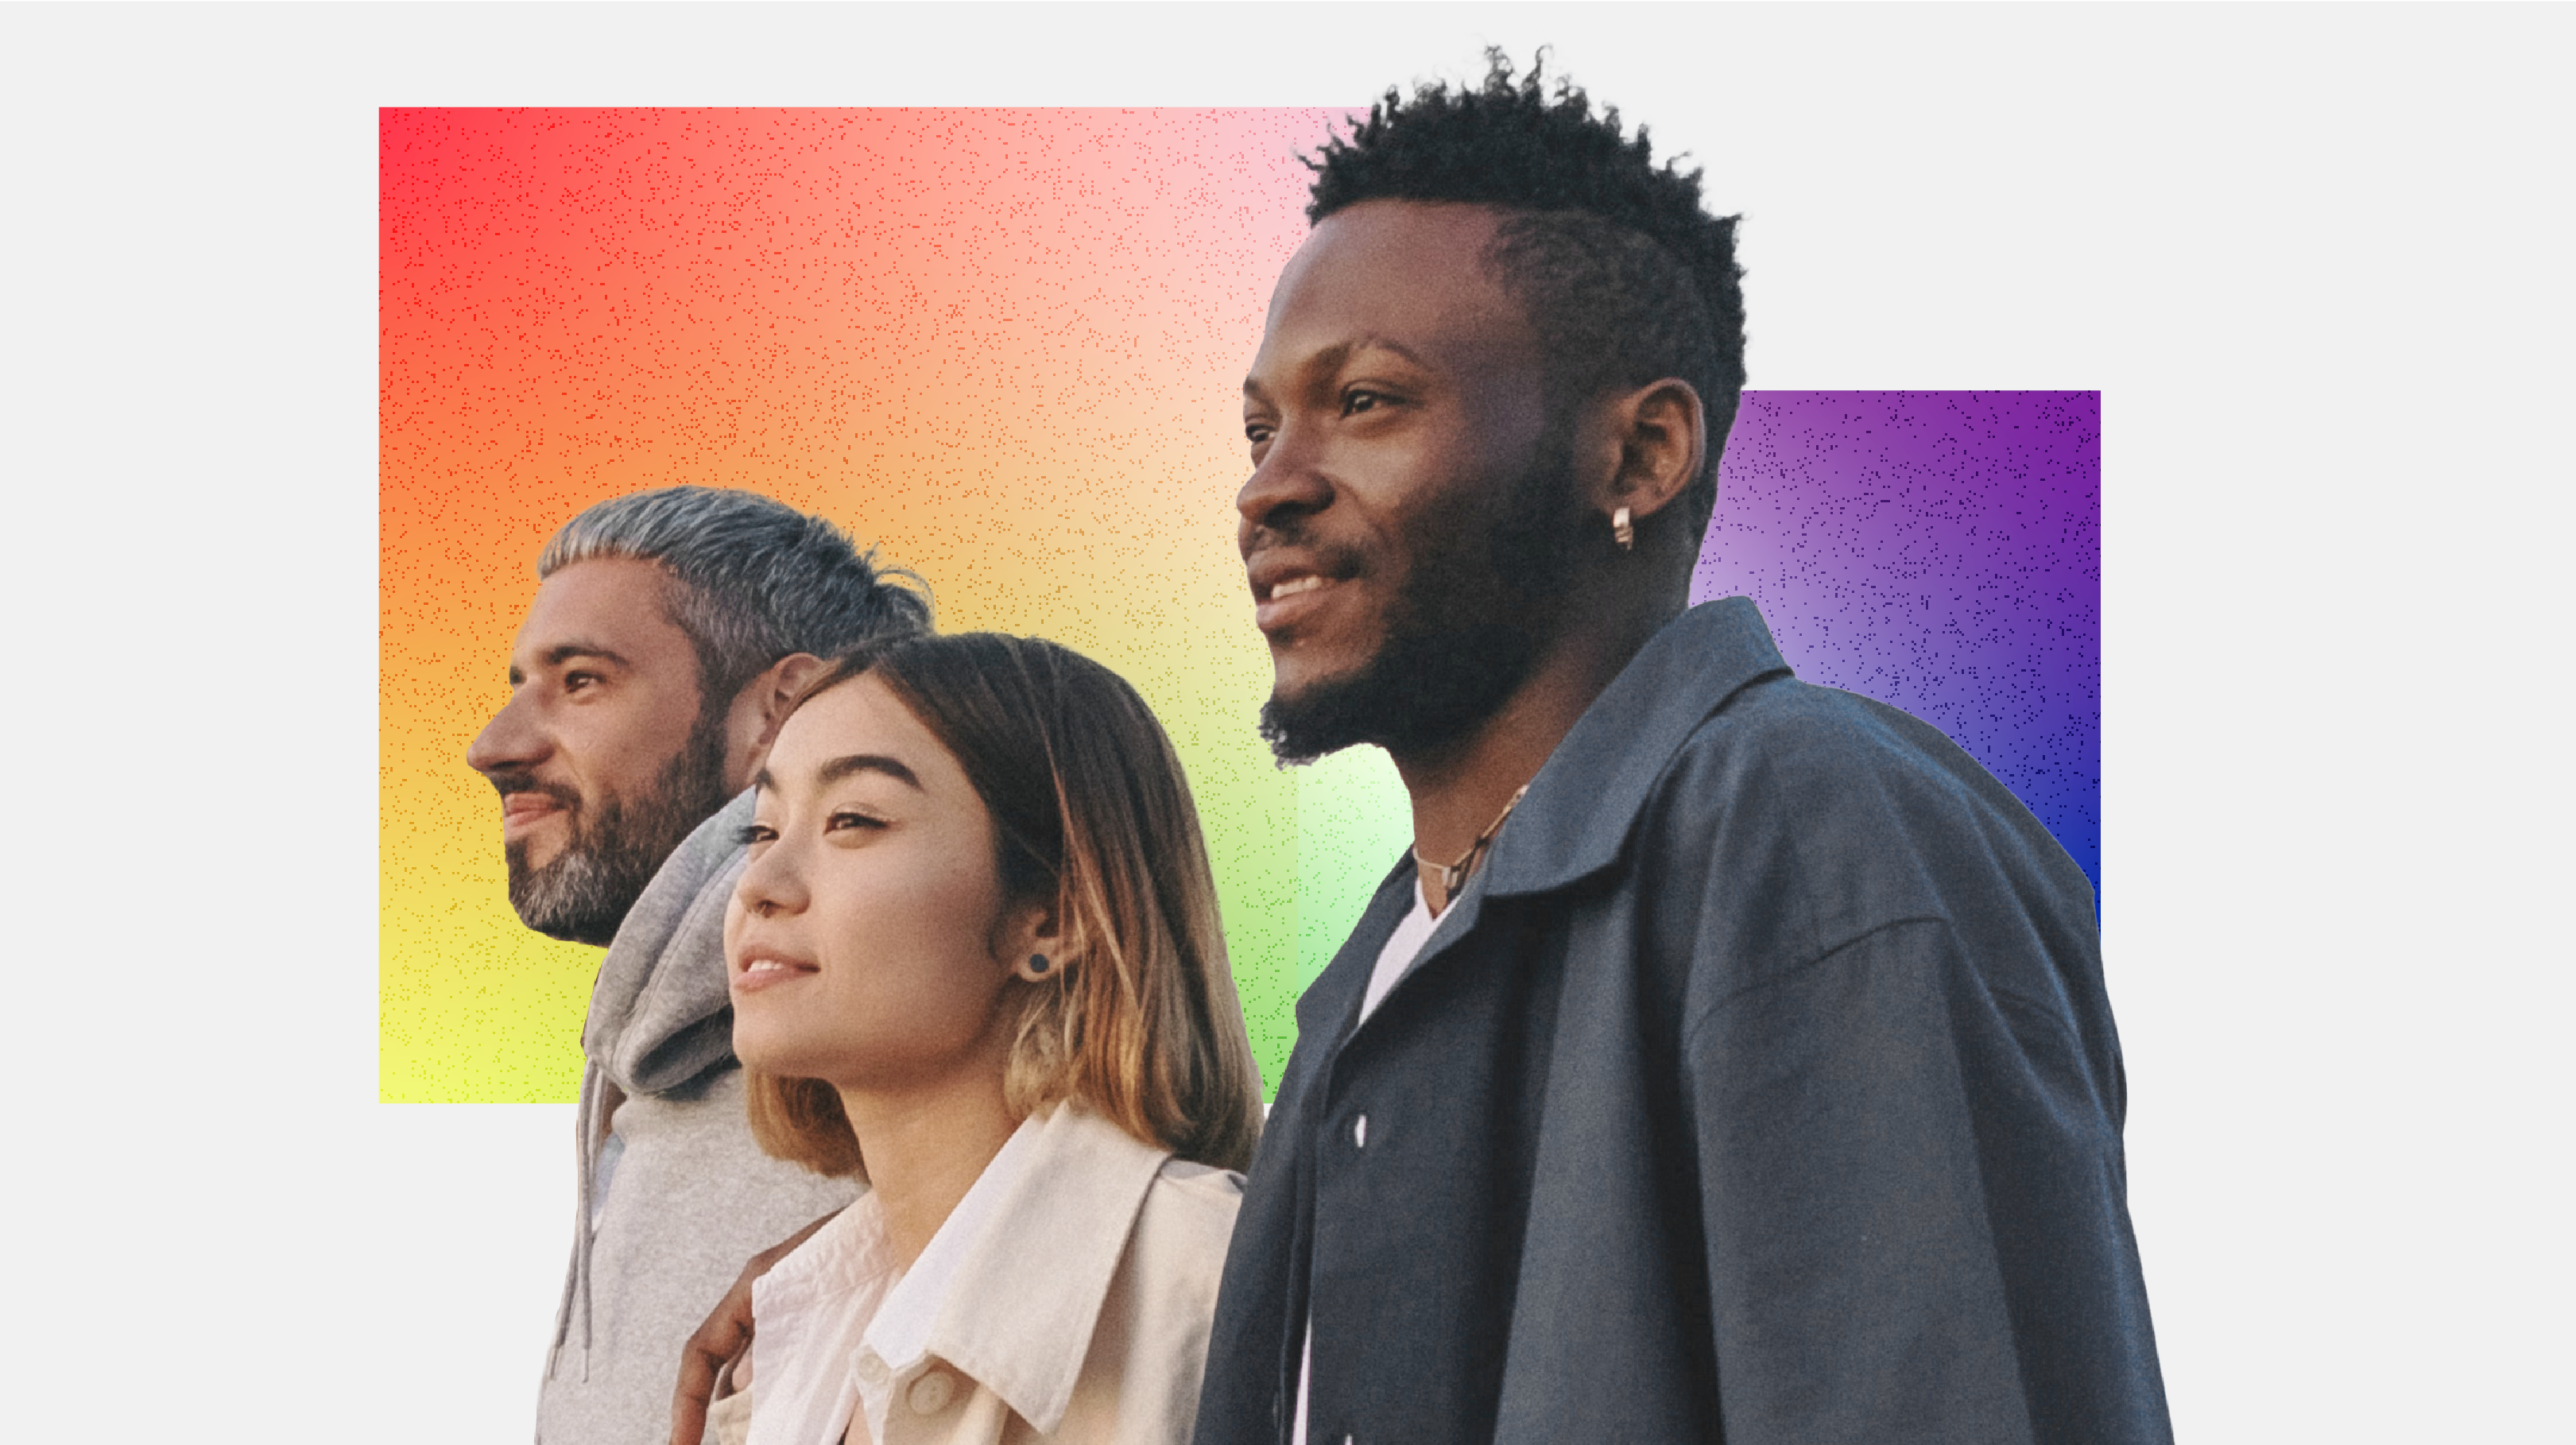  5 Ways to Support LGBTQ+ Employees in the Workplace